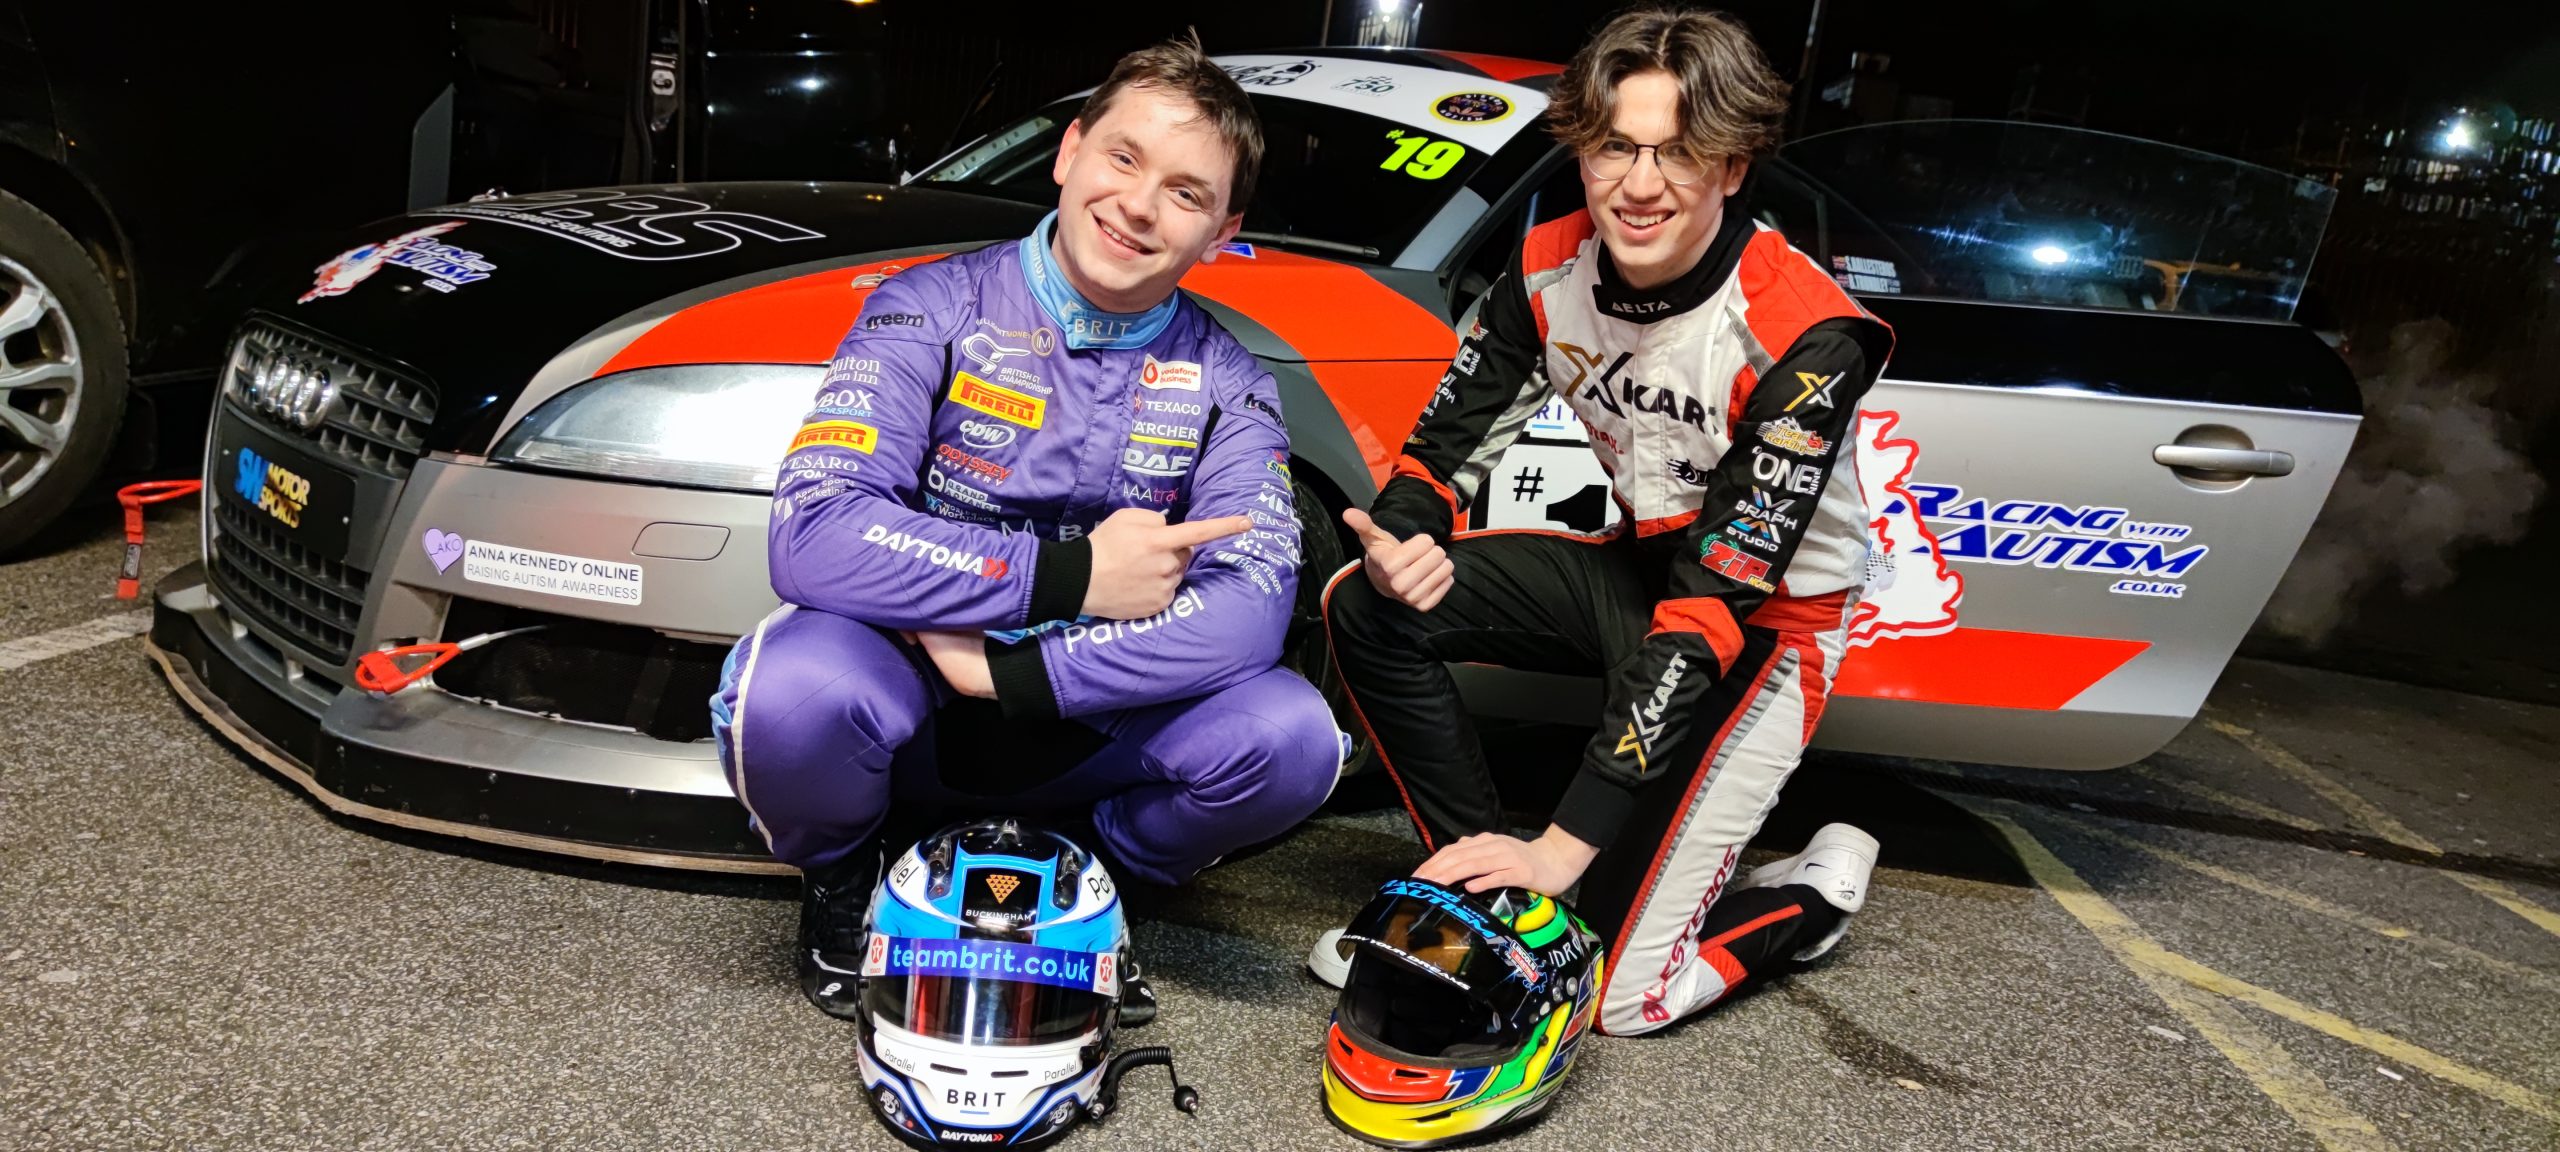 Bobby pairs up with fellow autistic racing driver to create ‘super team’ for Club Enduro season